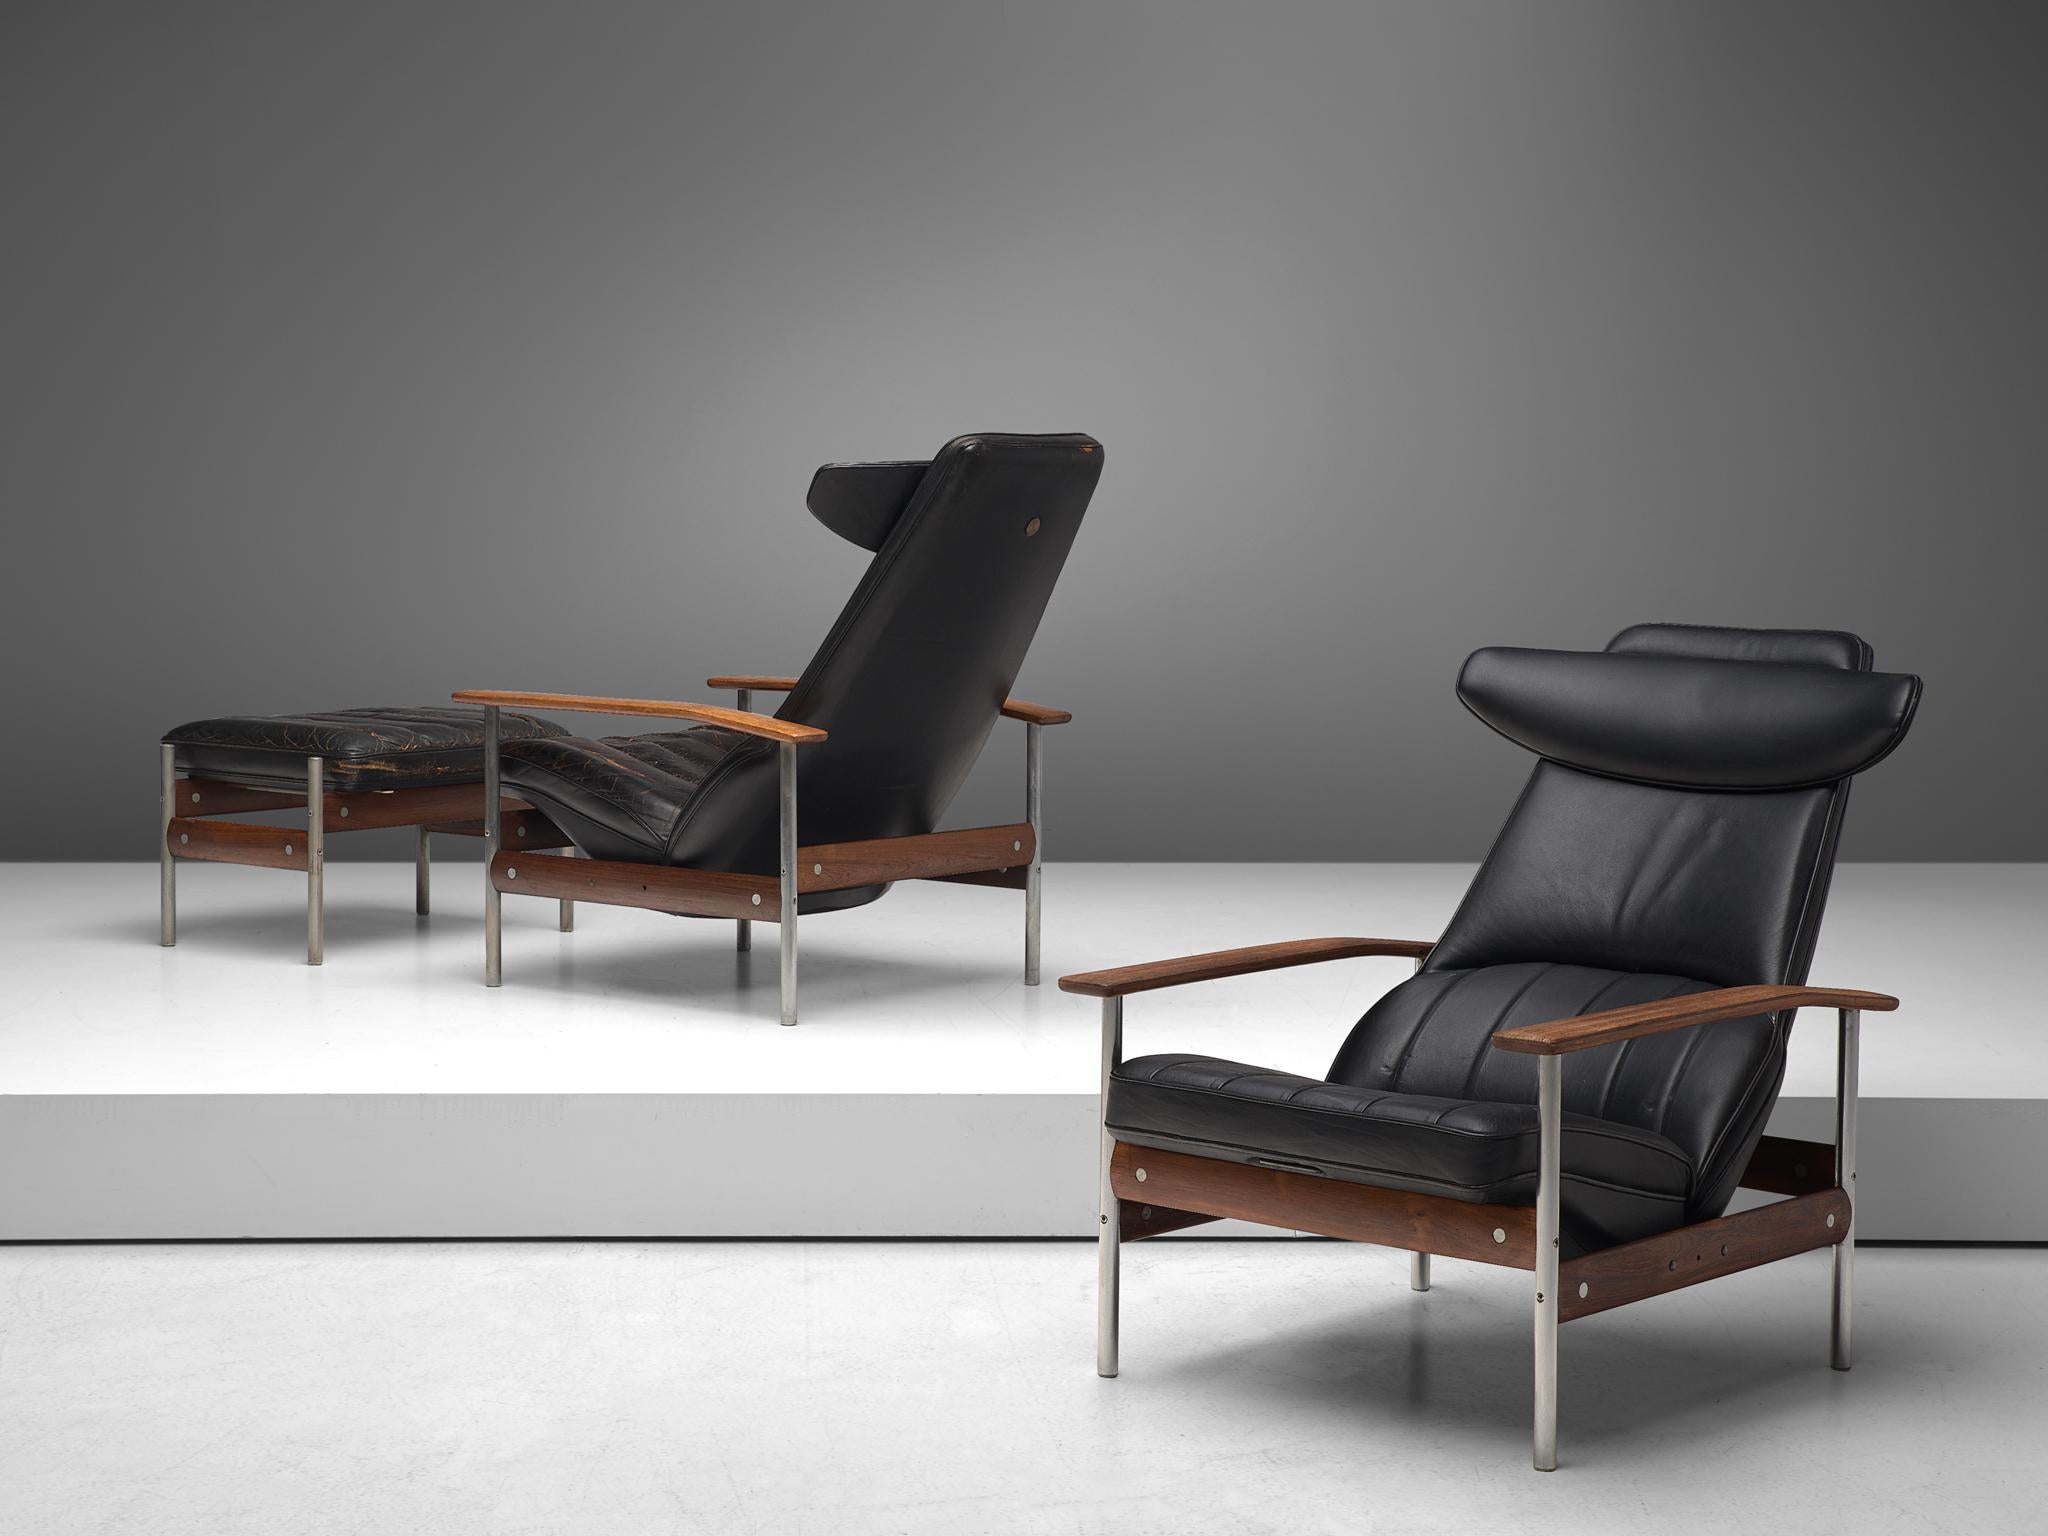 Sven Ivar Dysthe for Dokka Møbler, combined pair of lounge chairs with ottoman, leather, leatherette, rosewood, steel, Norway, 1960s.

Two armchairs with one ottoman, designed by Sven Ivar Dysthe for Dokke Møbler. The frames of these armchairs are